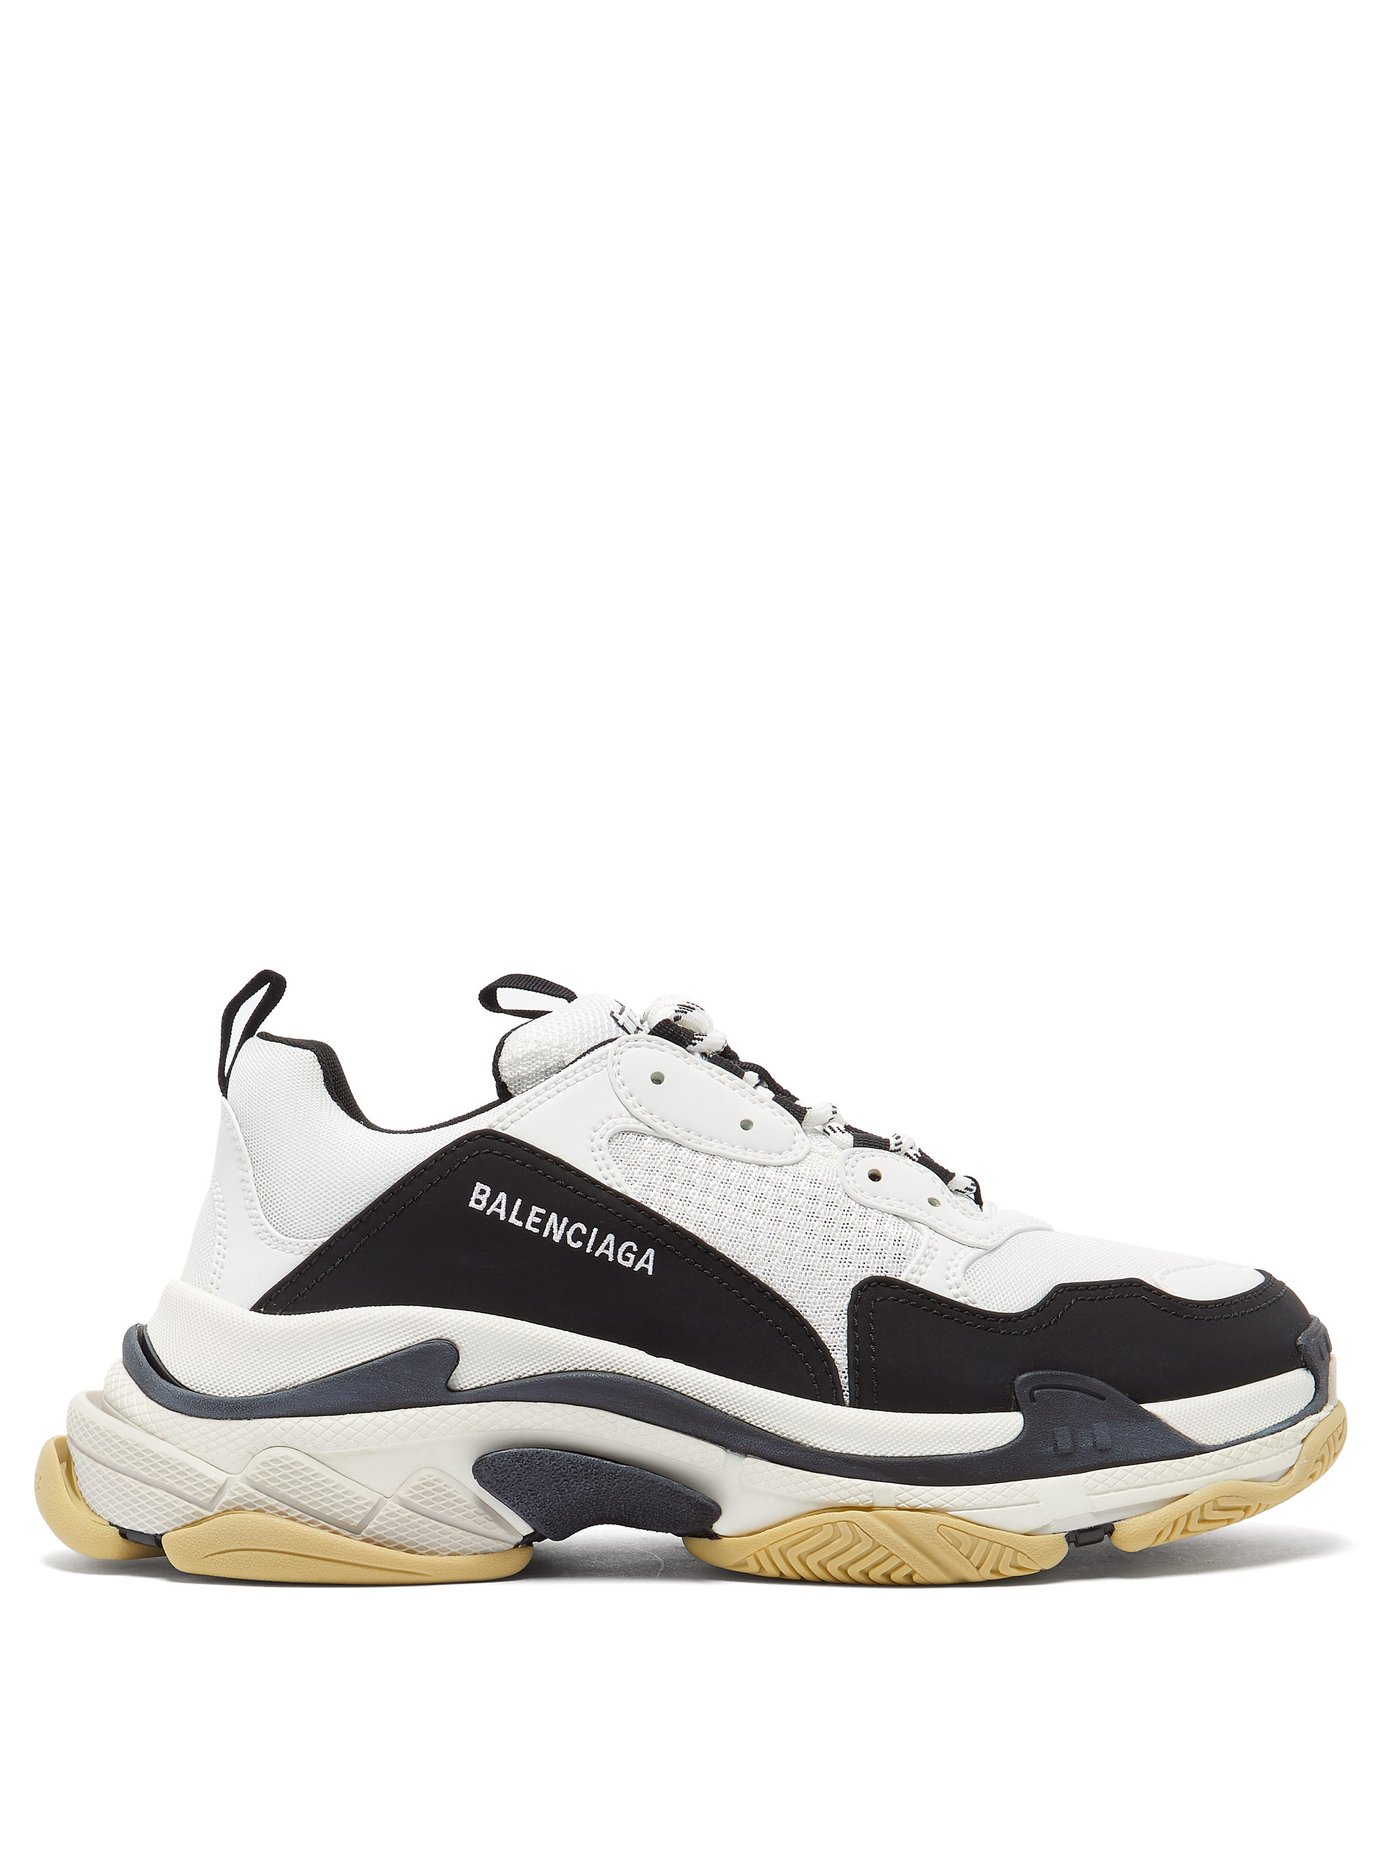 Balenciaga Triple S low top trainers $850 liked on Polyvore